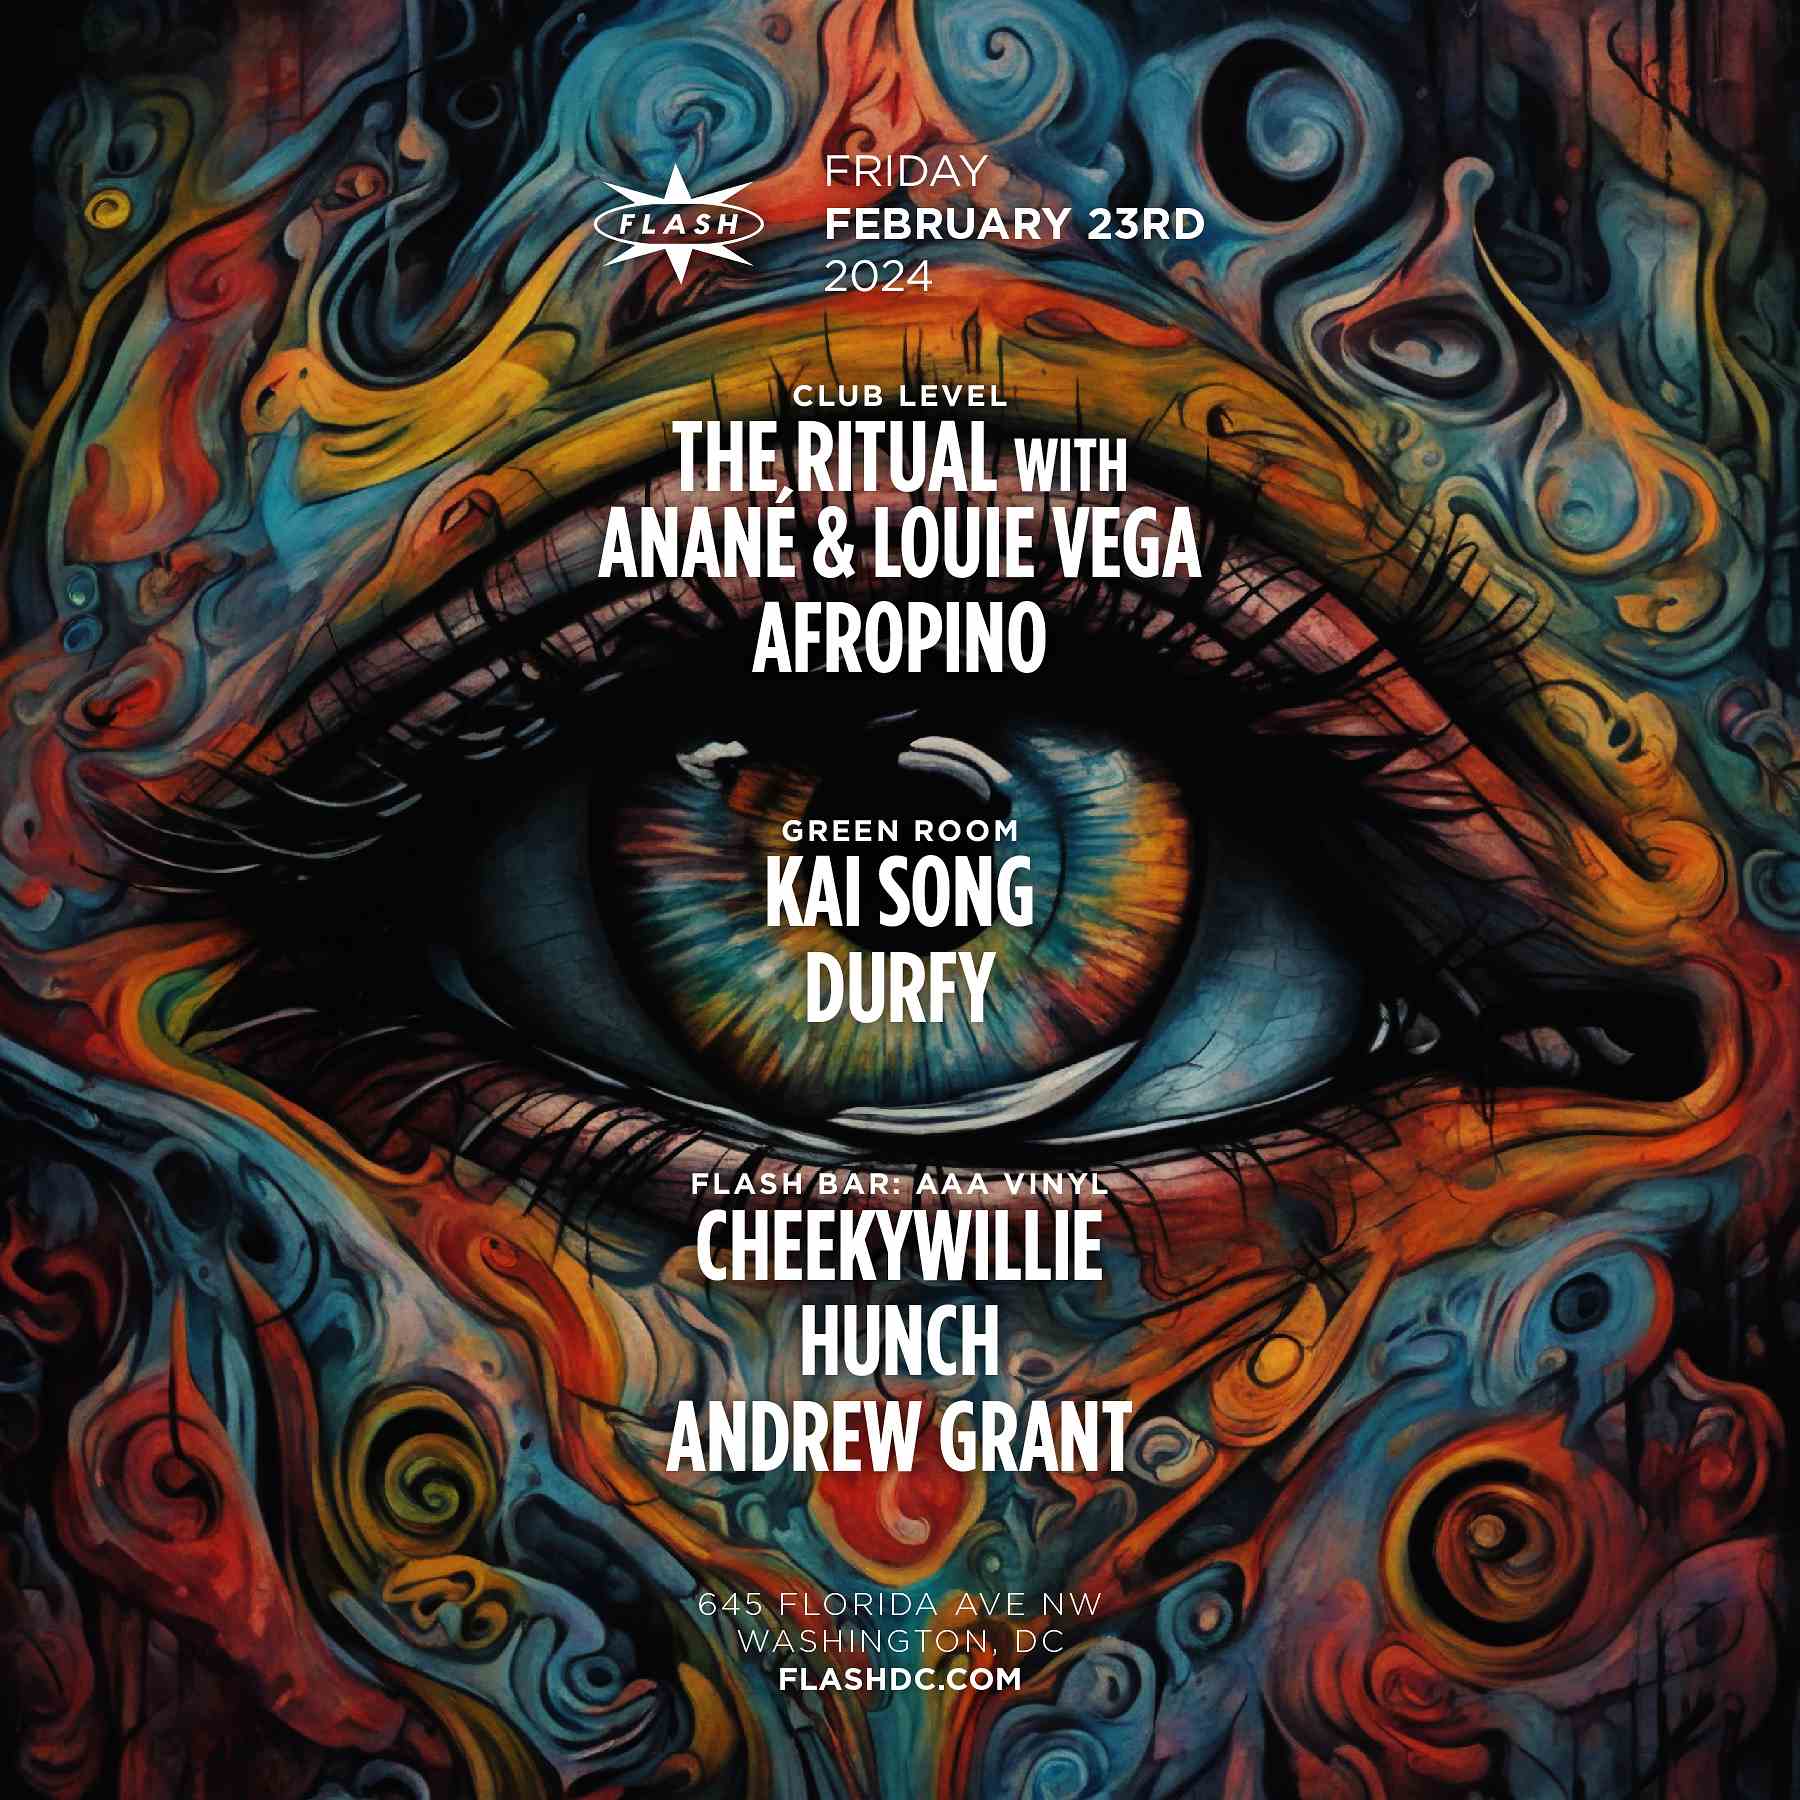 The Ritual with Anané & Louie Vega event flyer